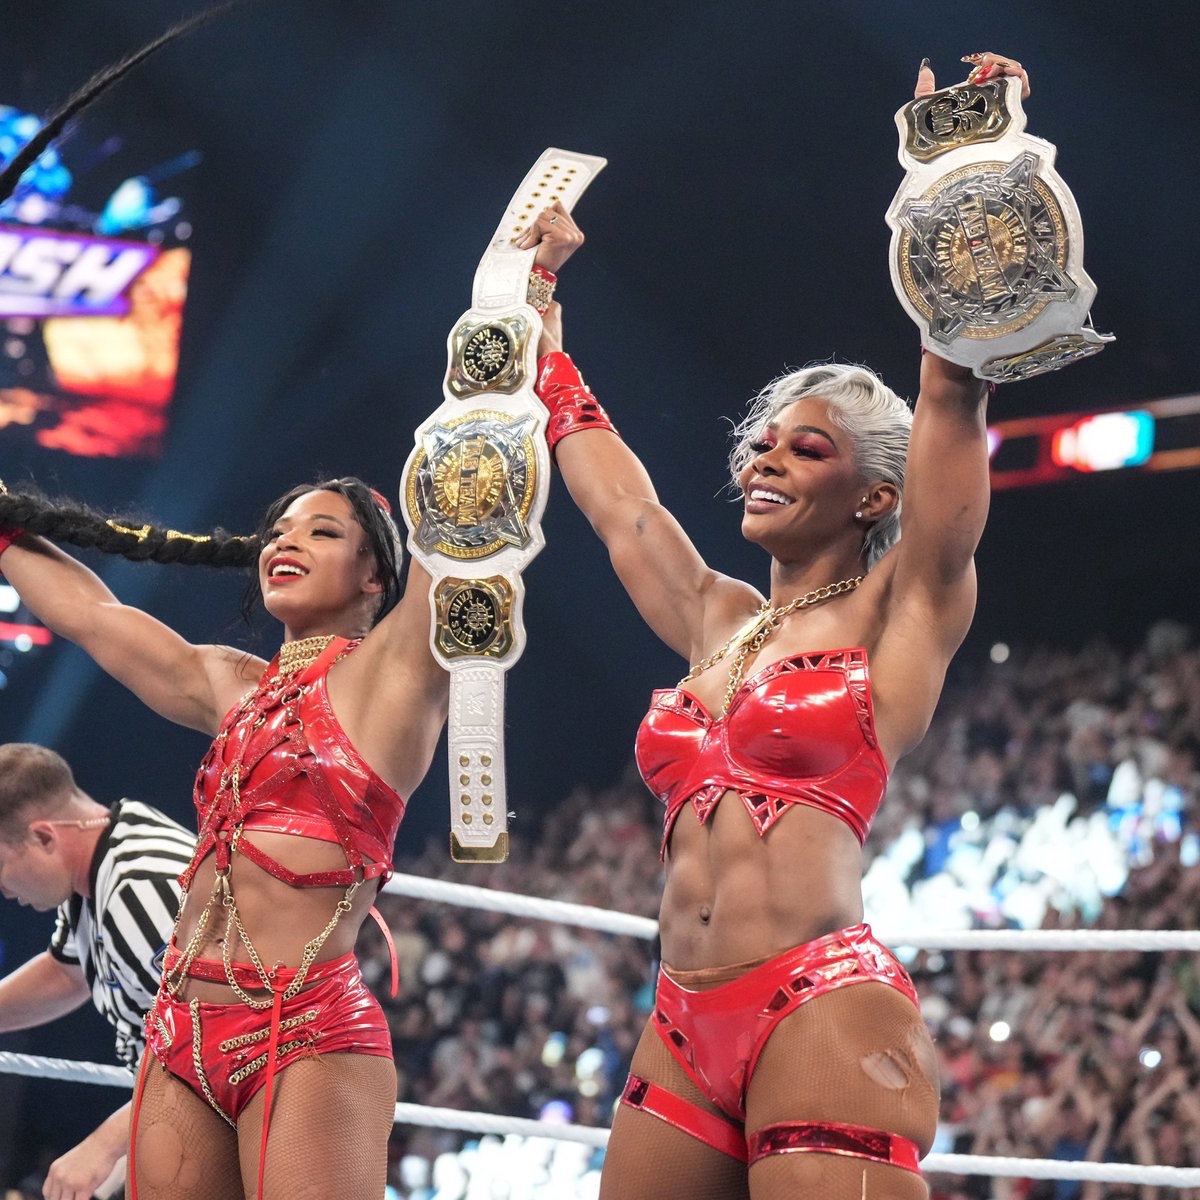 Bianca Belair and Jade Cargill have both qualified for round 2 of the Queen of the ring tournament 👑